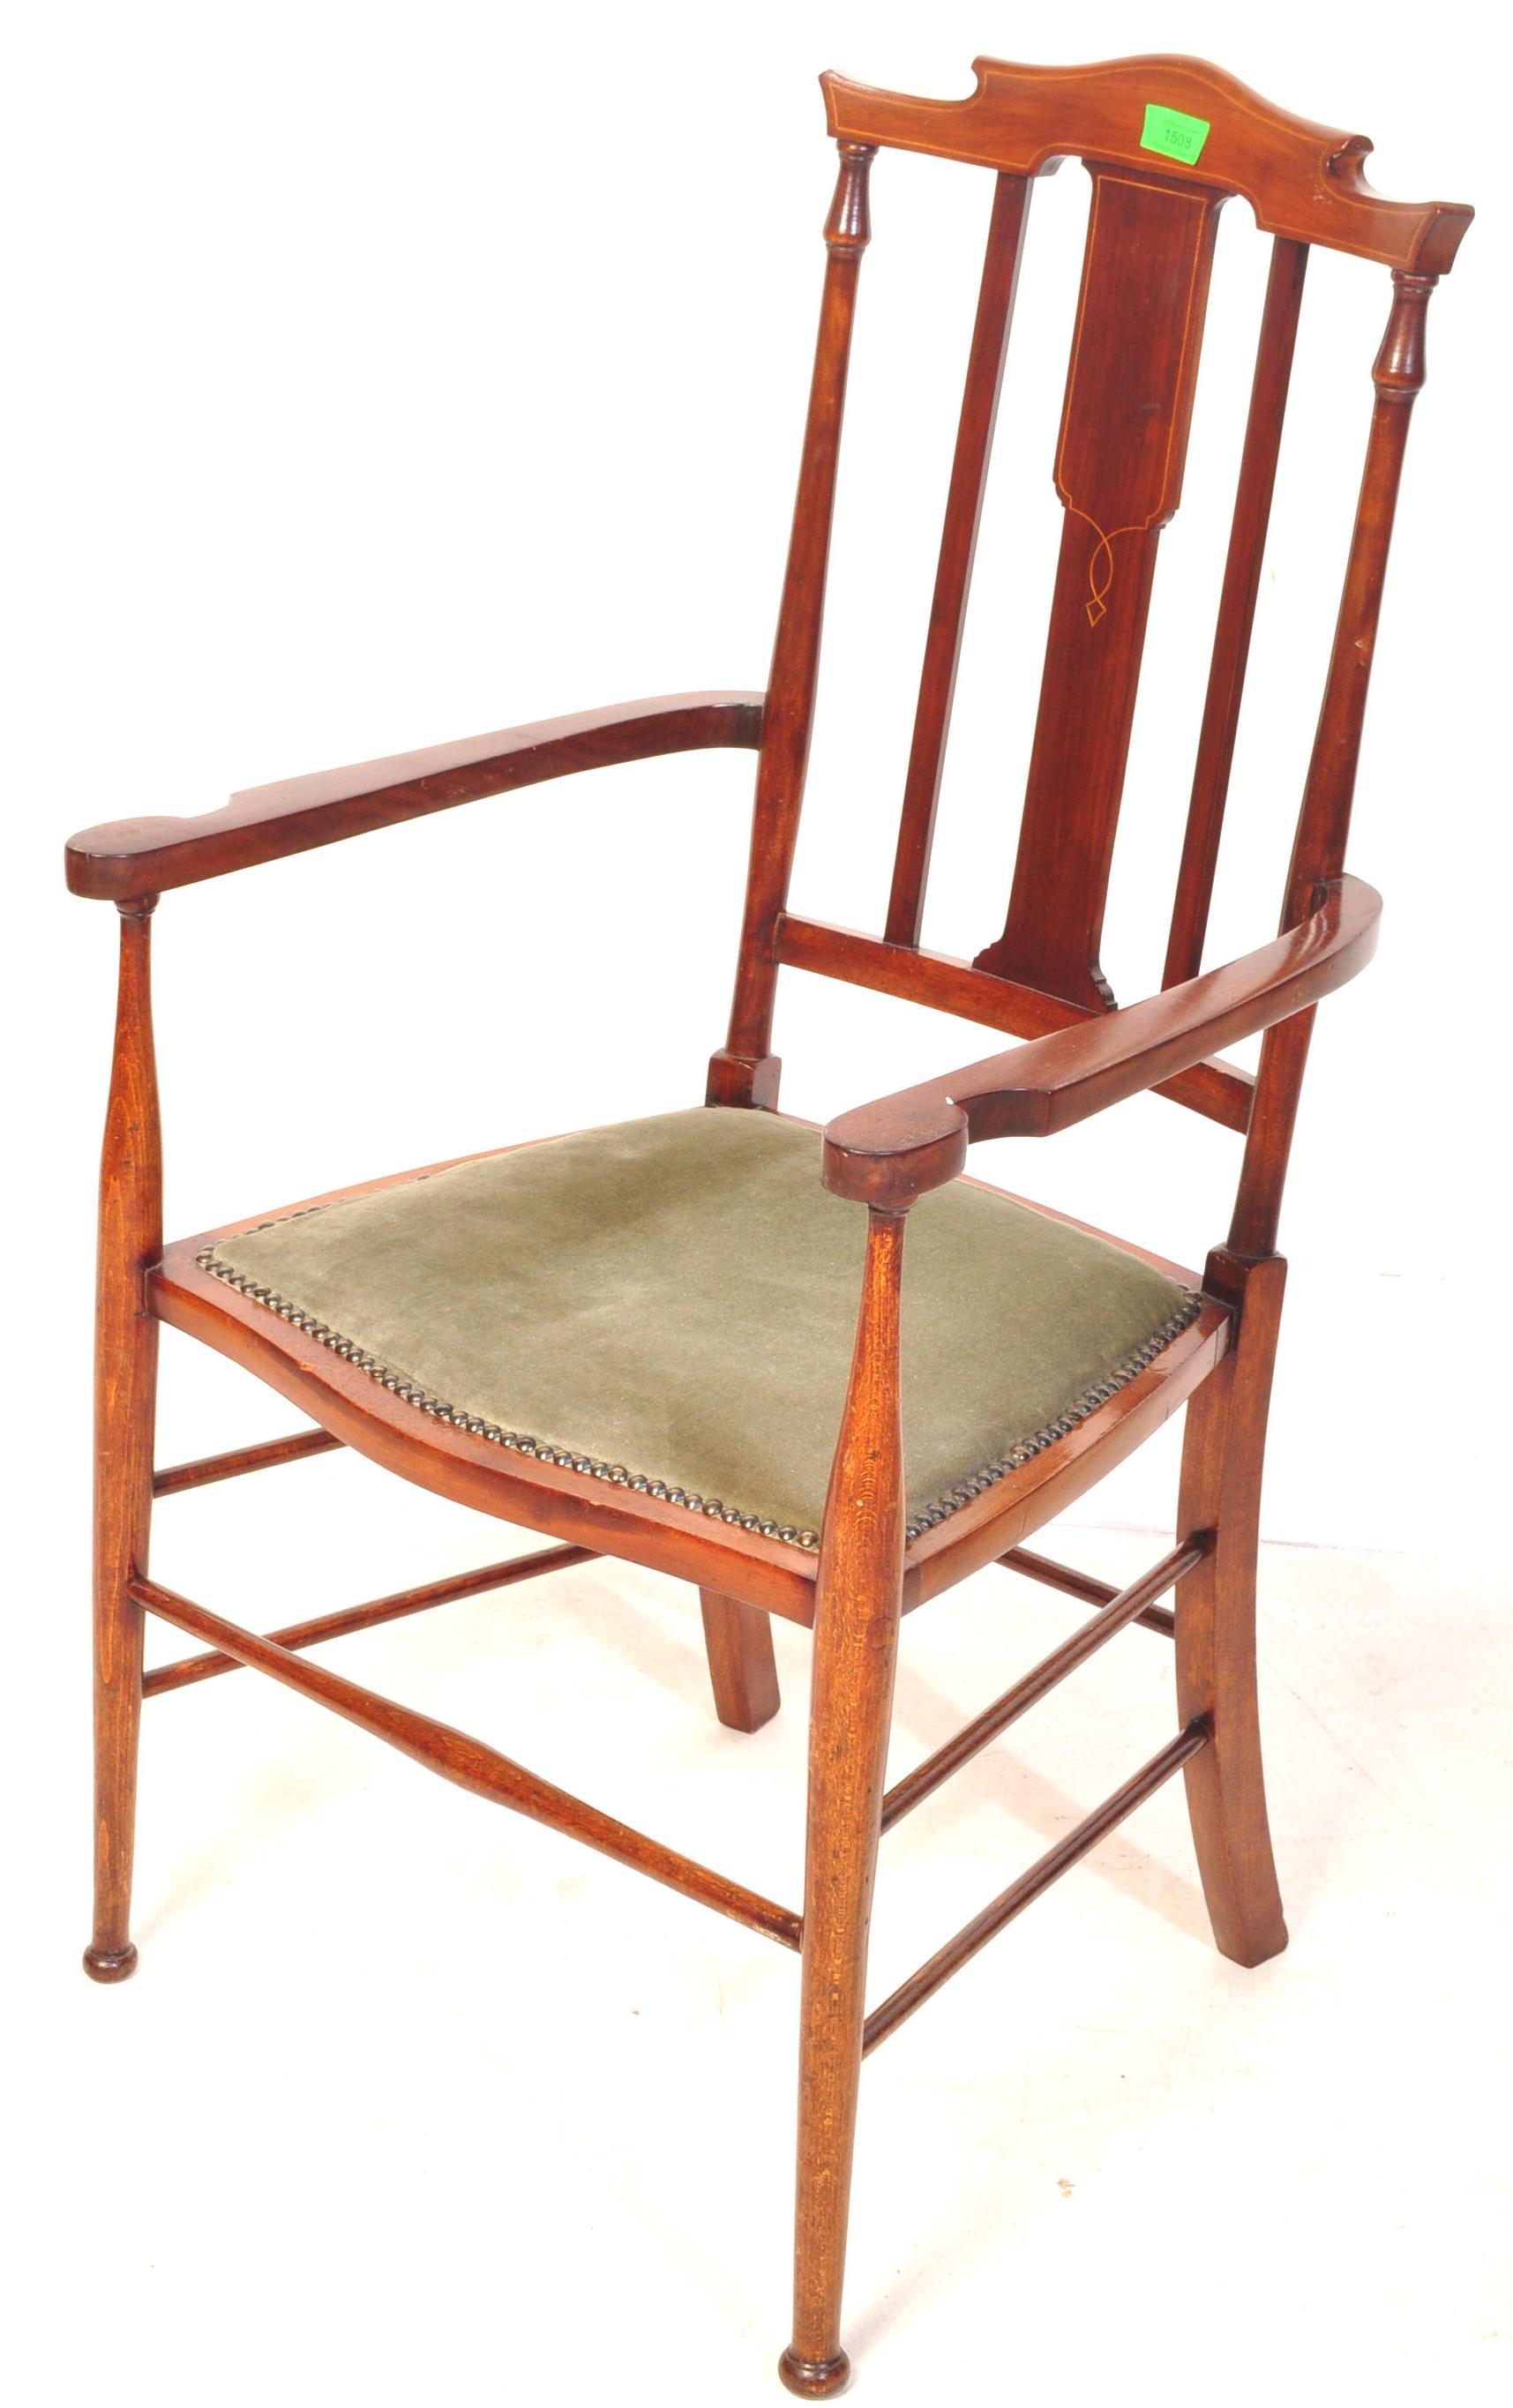 EDWARDIAN BEECH AND ELM CHAIR - Image 2 of 7